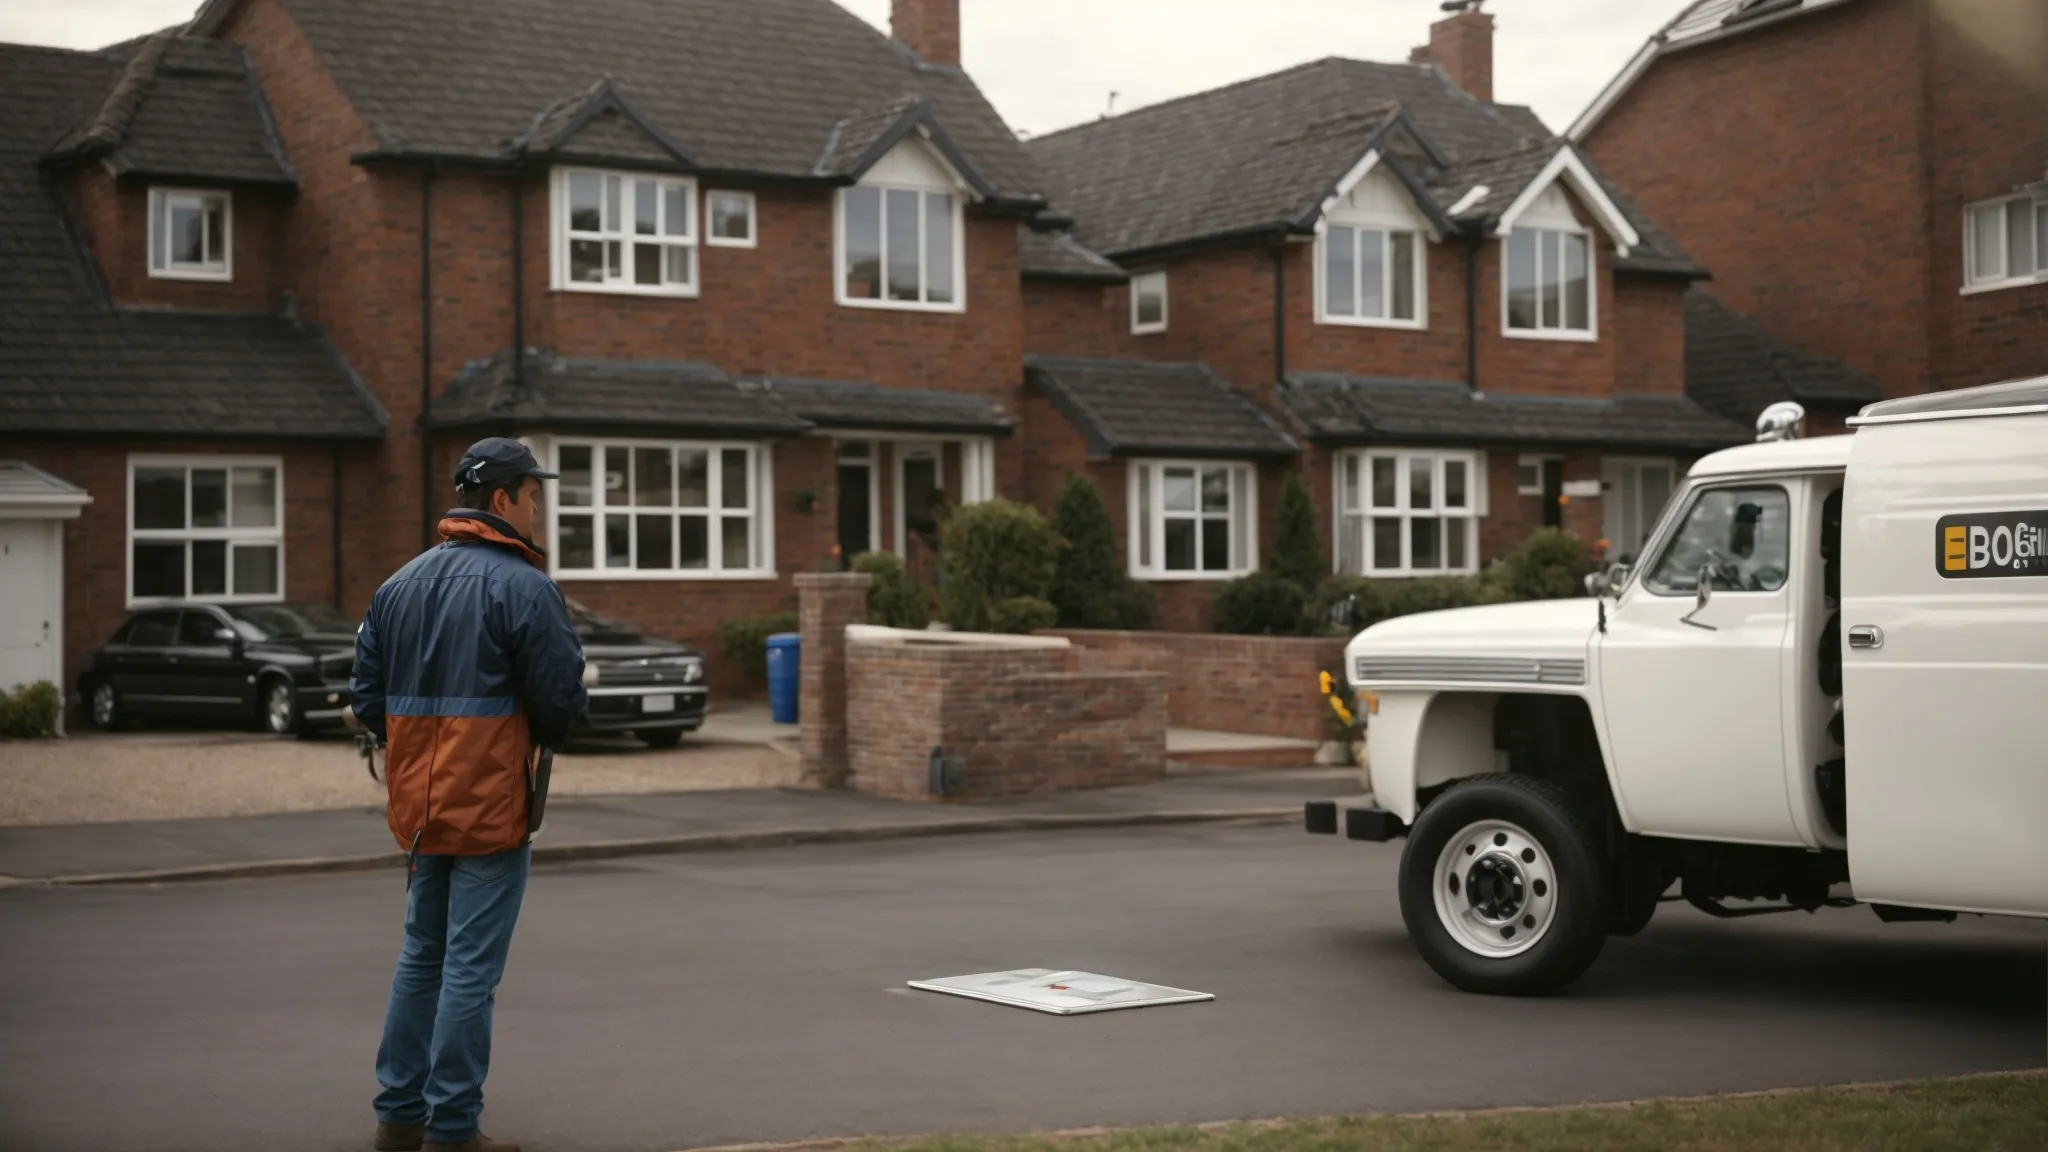 a tradesman consulting a digital tablet outside a residential home, with a service van parked nearby.